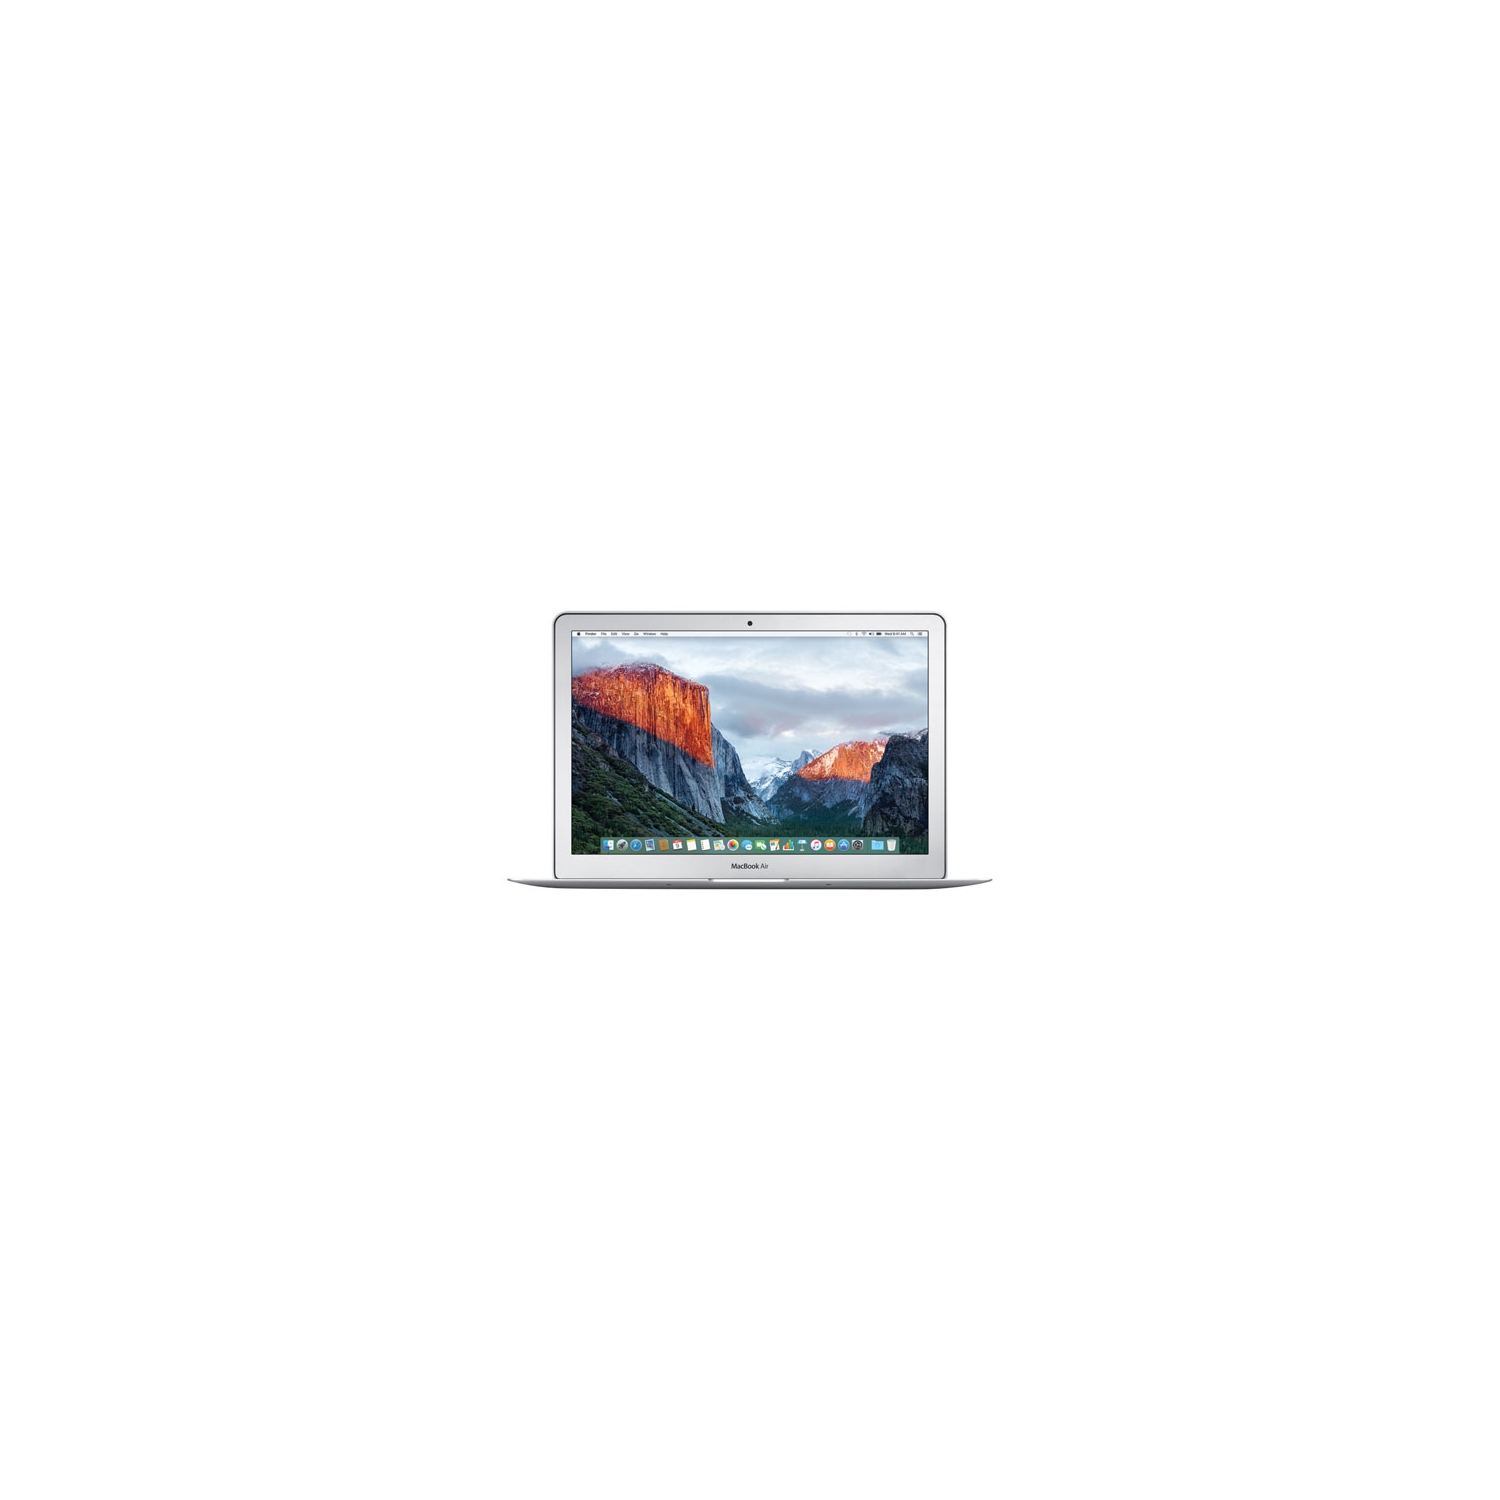 Refurbished (Excellent) - Apple MacBook Air 13" (2015) Dual-Core Intel Core i5 1.6GHz Laptop - English - Certified Refurbished